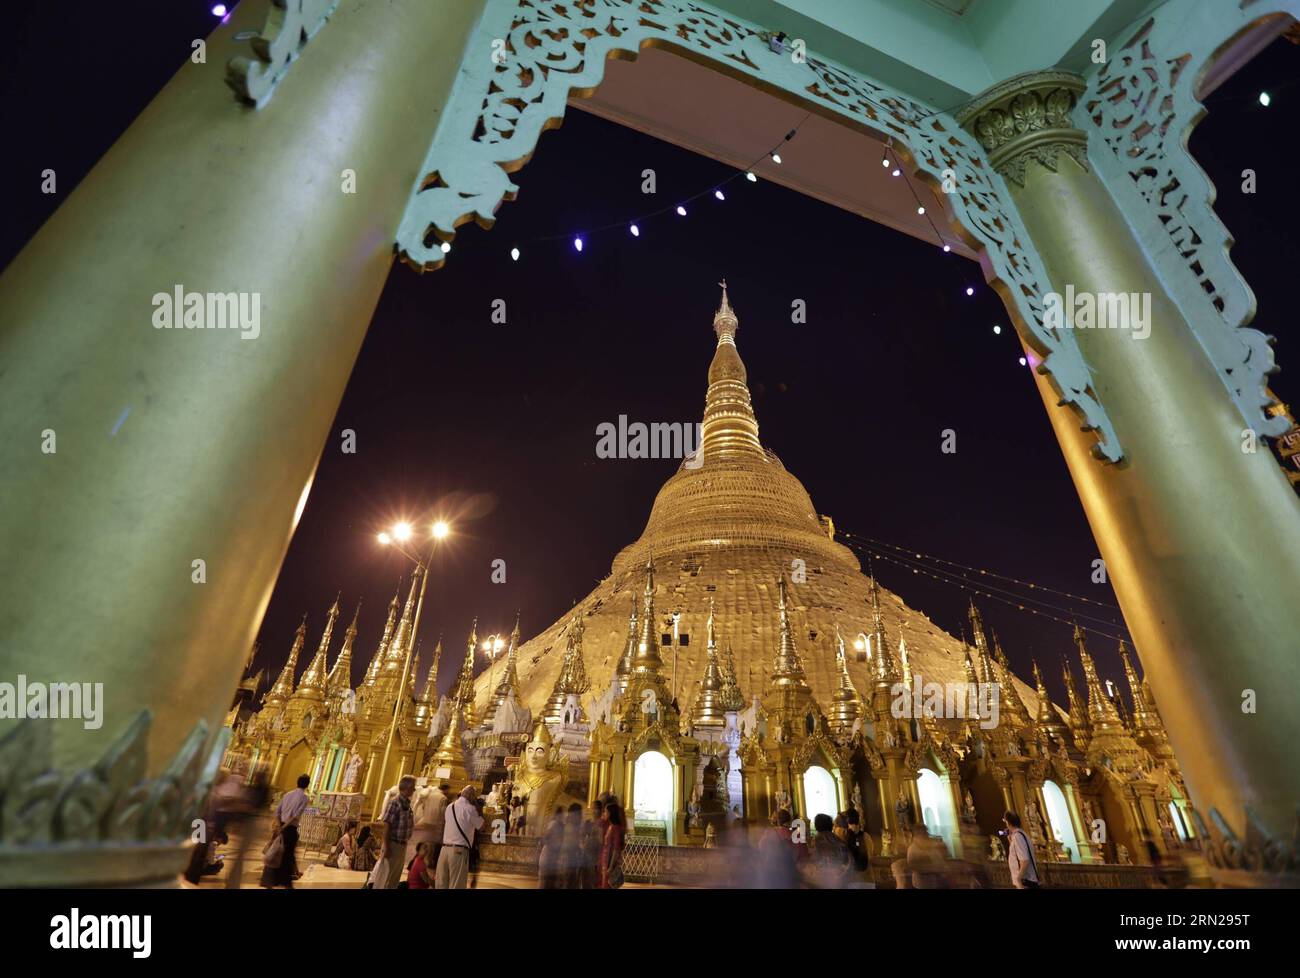 YANGON, Feb. 17, 2015 -- Photo taken on Feb. 17, 2015 shows the Shwedagon pagoda in Yangon, Myanmar. Shwedagon Pagoda is a repository of the best of Myanmar s heritages -- architecture, sculpture and arts. It consists of hundreds of colorful temples, stupas and statues that reflect architectural styles spanning almost 2,500 years. ) MYANMAR-YANGON-SHWEDAGON PAGODA UxAung PUBLICATIONxNOTxINxCHN   Yangon Feb 17 2015 Photo Taken ON Feb 17 2015 Shows The Shwedagon Pagoda in Yangon Myanmar Shwedagon Pagoda IS a repository of The Best of Myanmar S heritage Architecture Sculpture and Arts IT consists Stock Photo